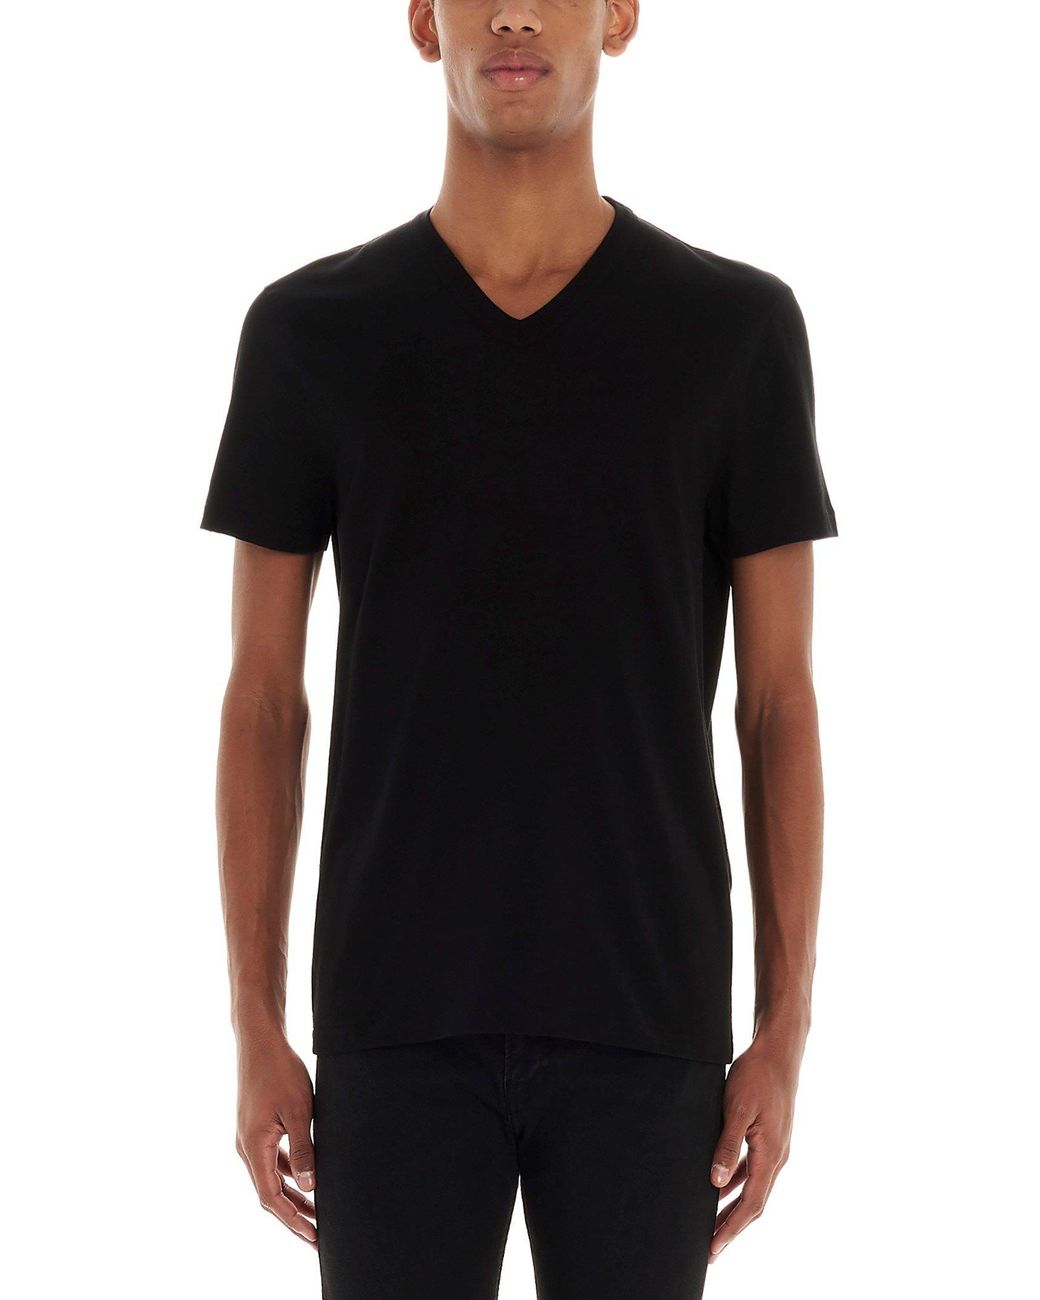 Tom Ford Other Materials T-shirt in Black for Men - Lyst